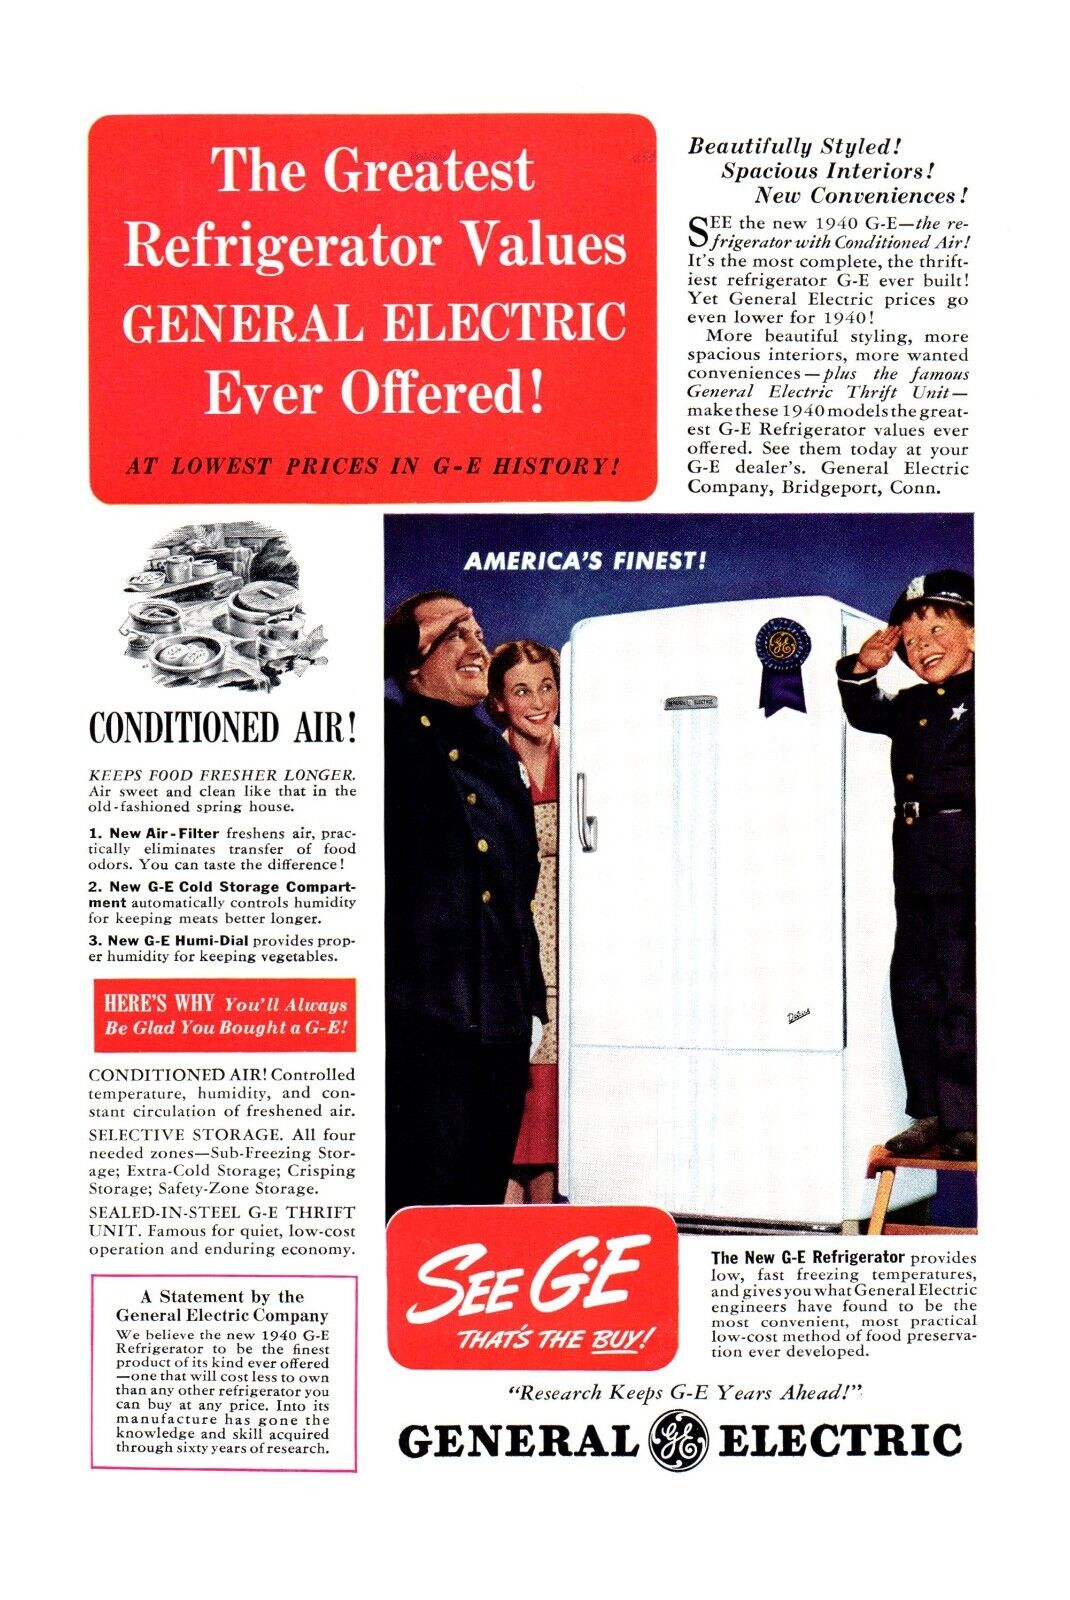 General Electric Refrigerator GE Conditioned Air Print Advertisement 1940